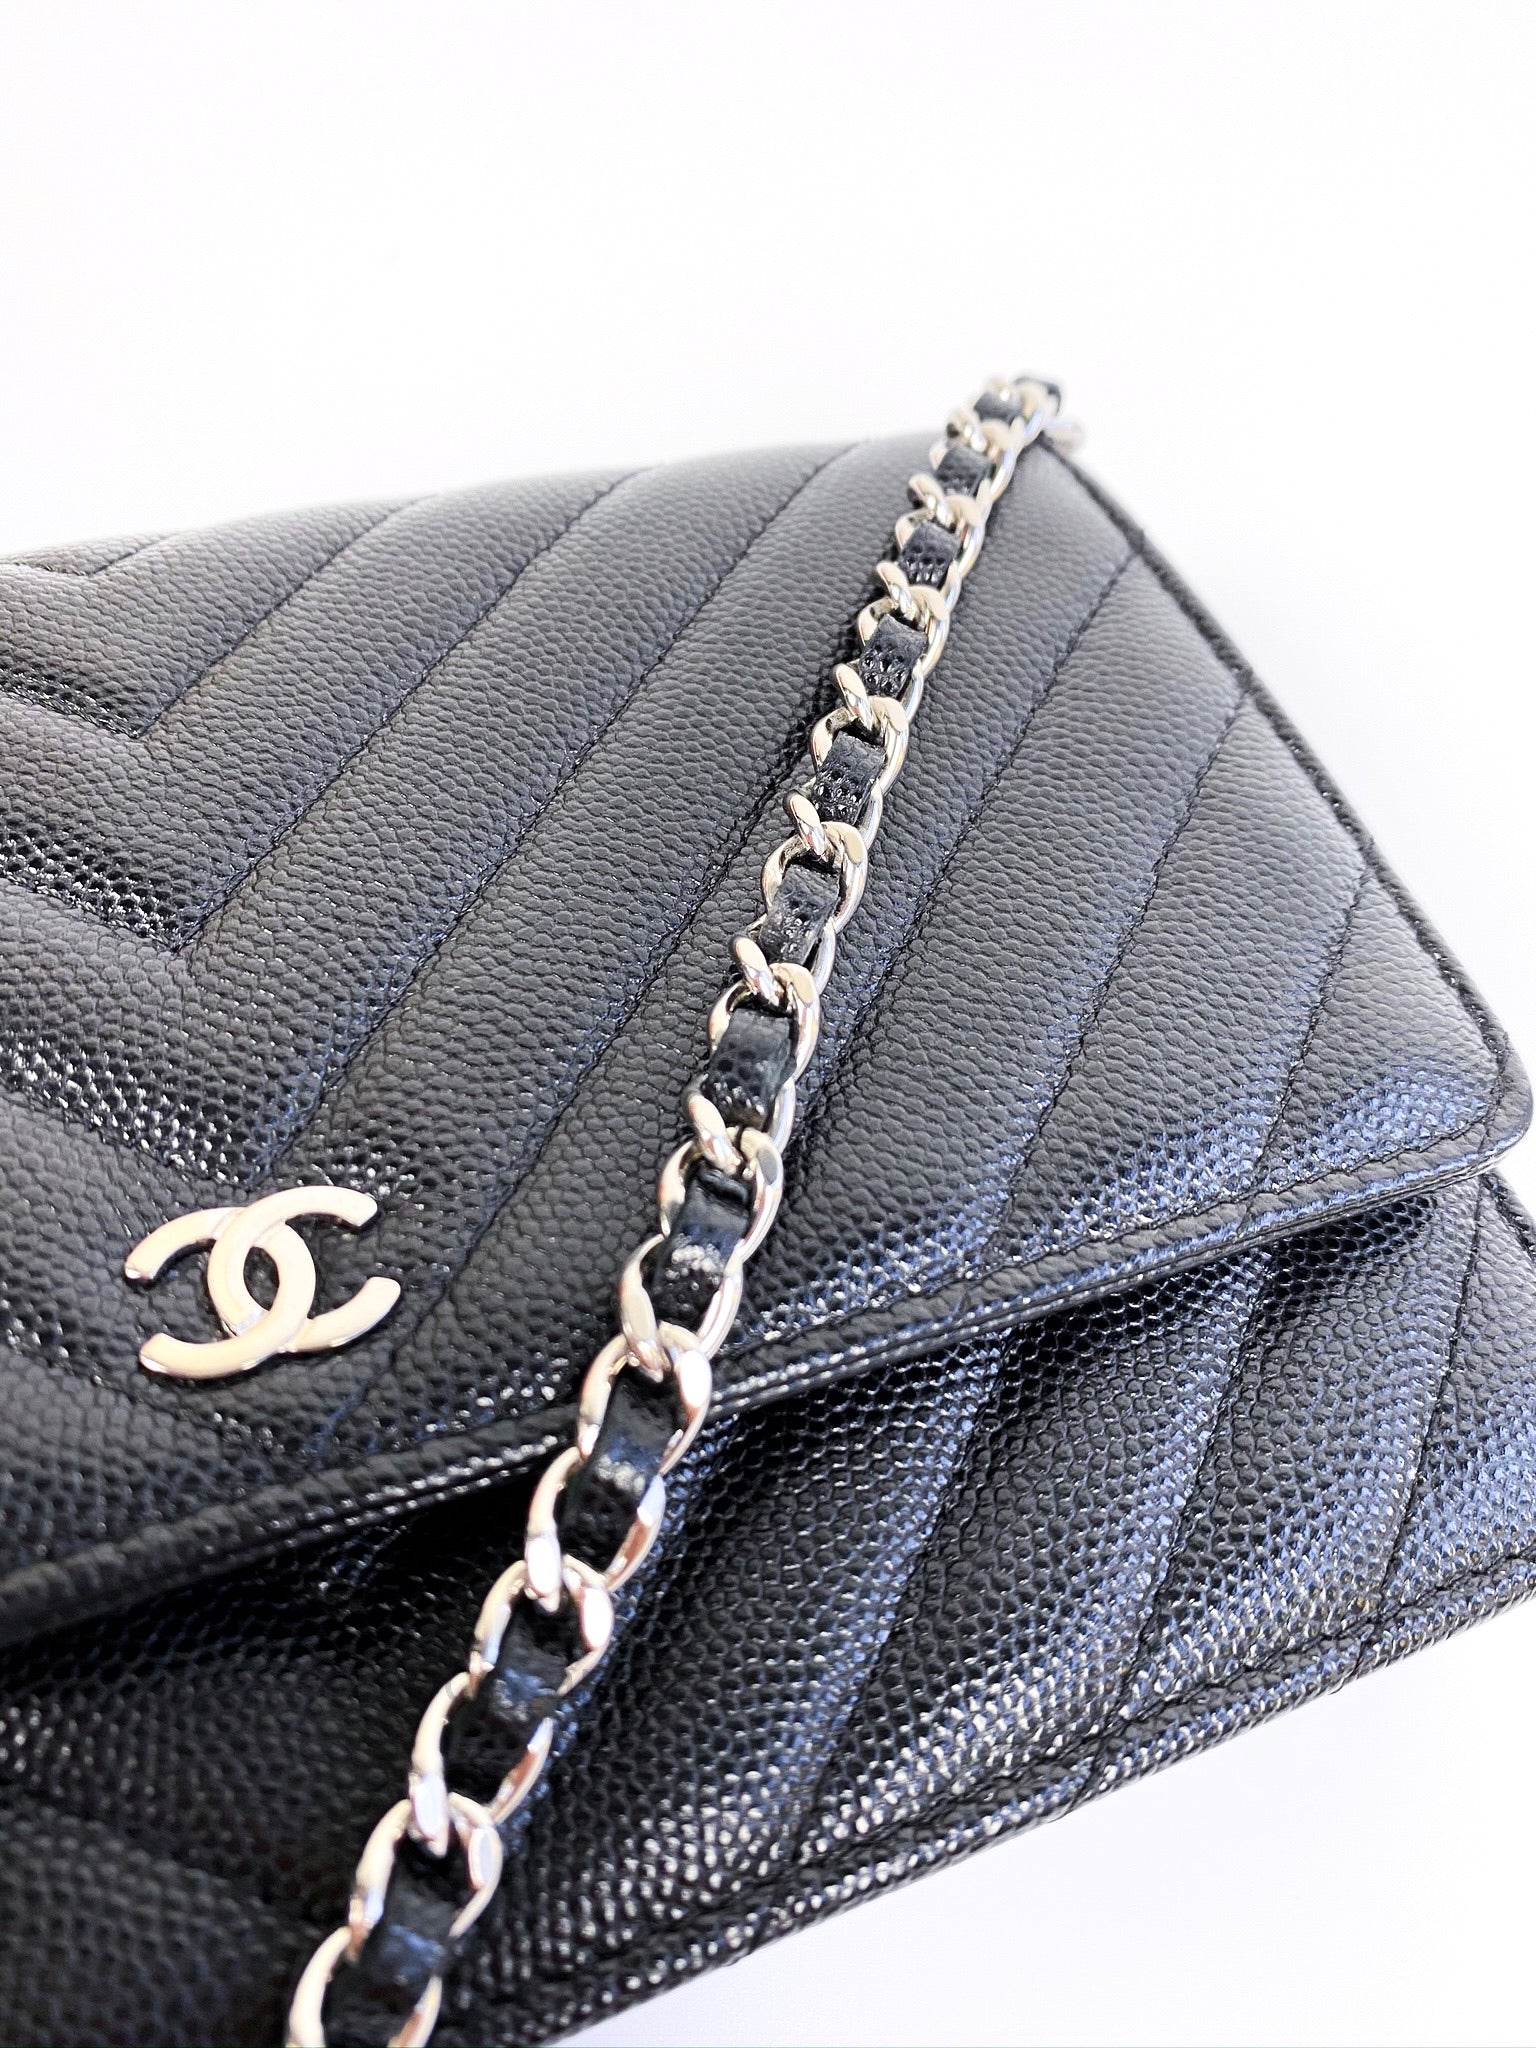 CHANEL Caviar Quilted Pick Me Up Wallet replica - Affordable Luxury Bags